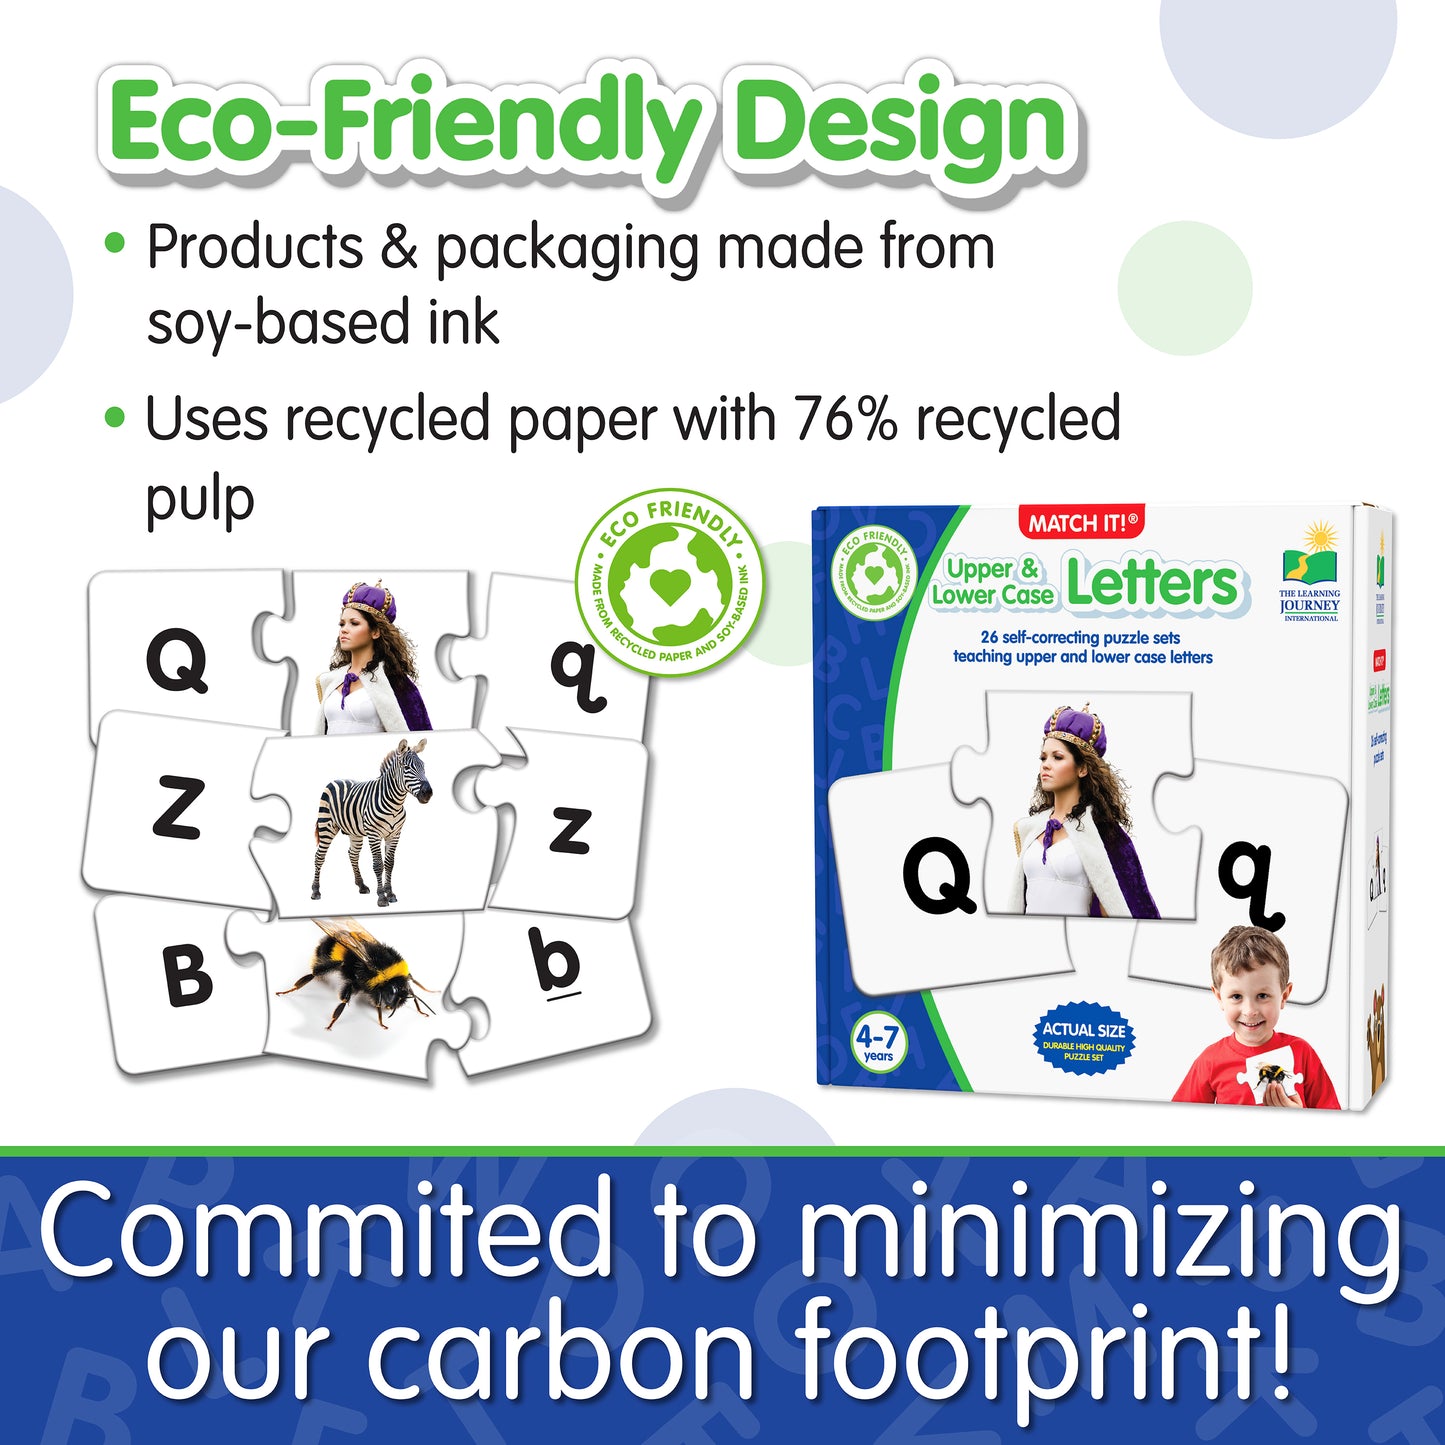 Infographic about Match It - Upper and Lower Case Letters' eco-friendly design that says, "Committed to minimizing our carbon footprint!"